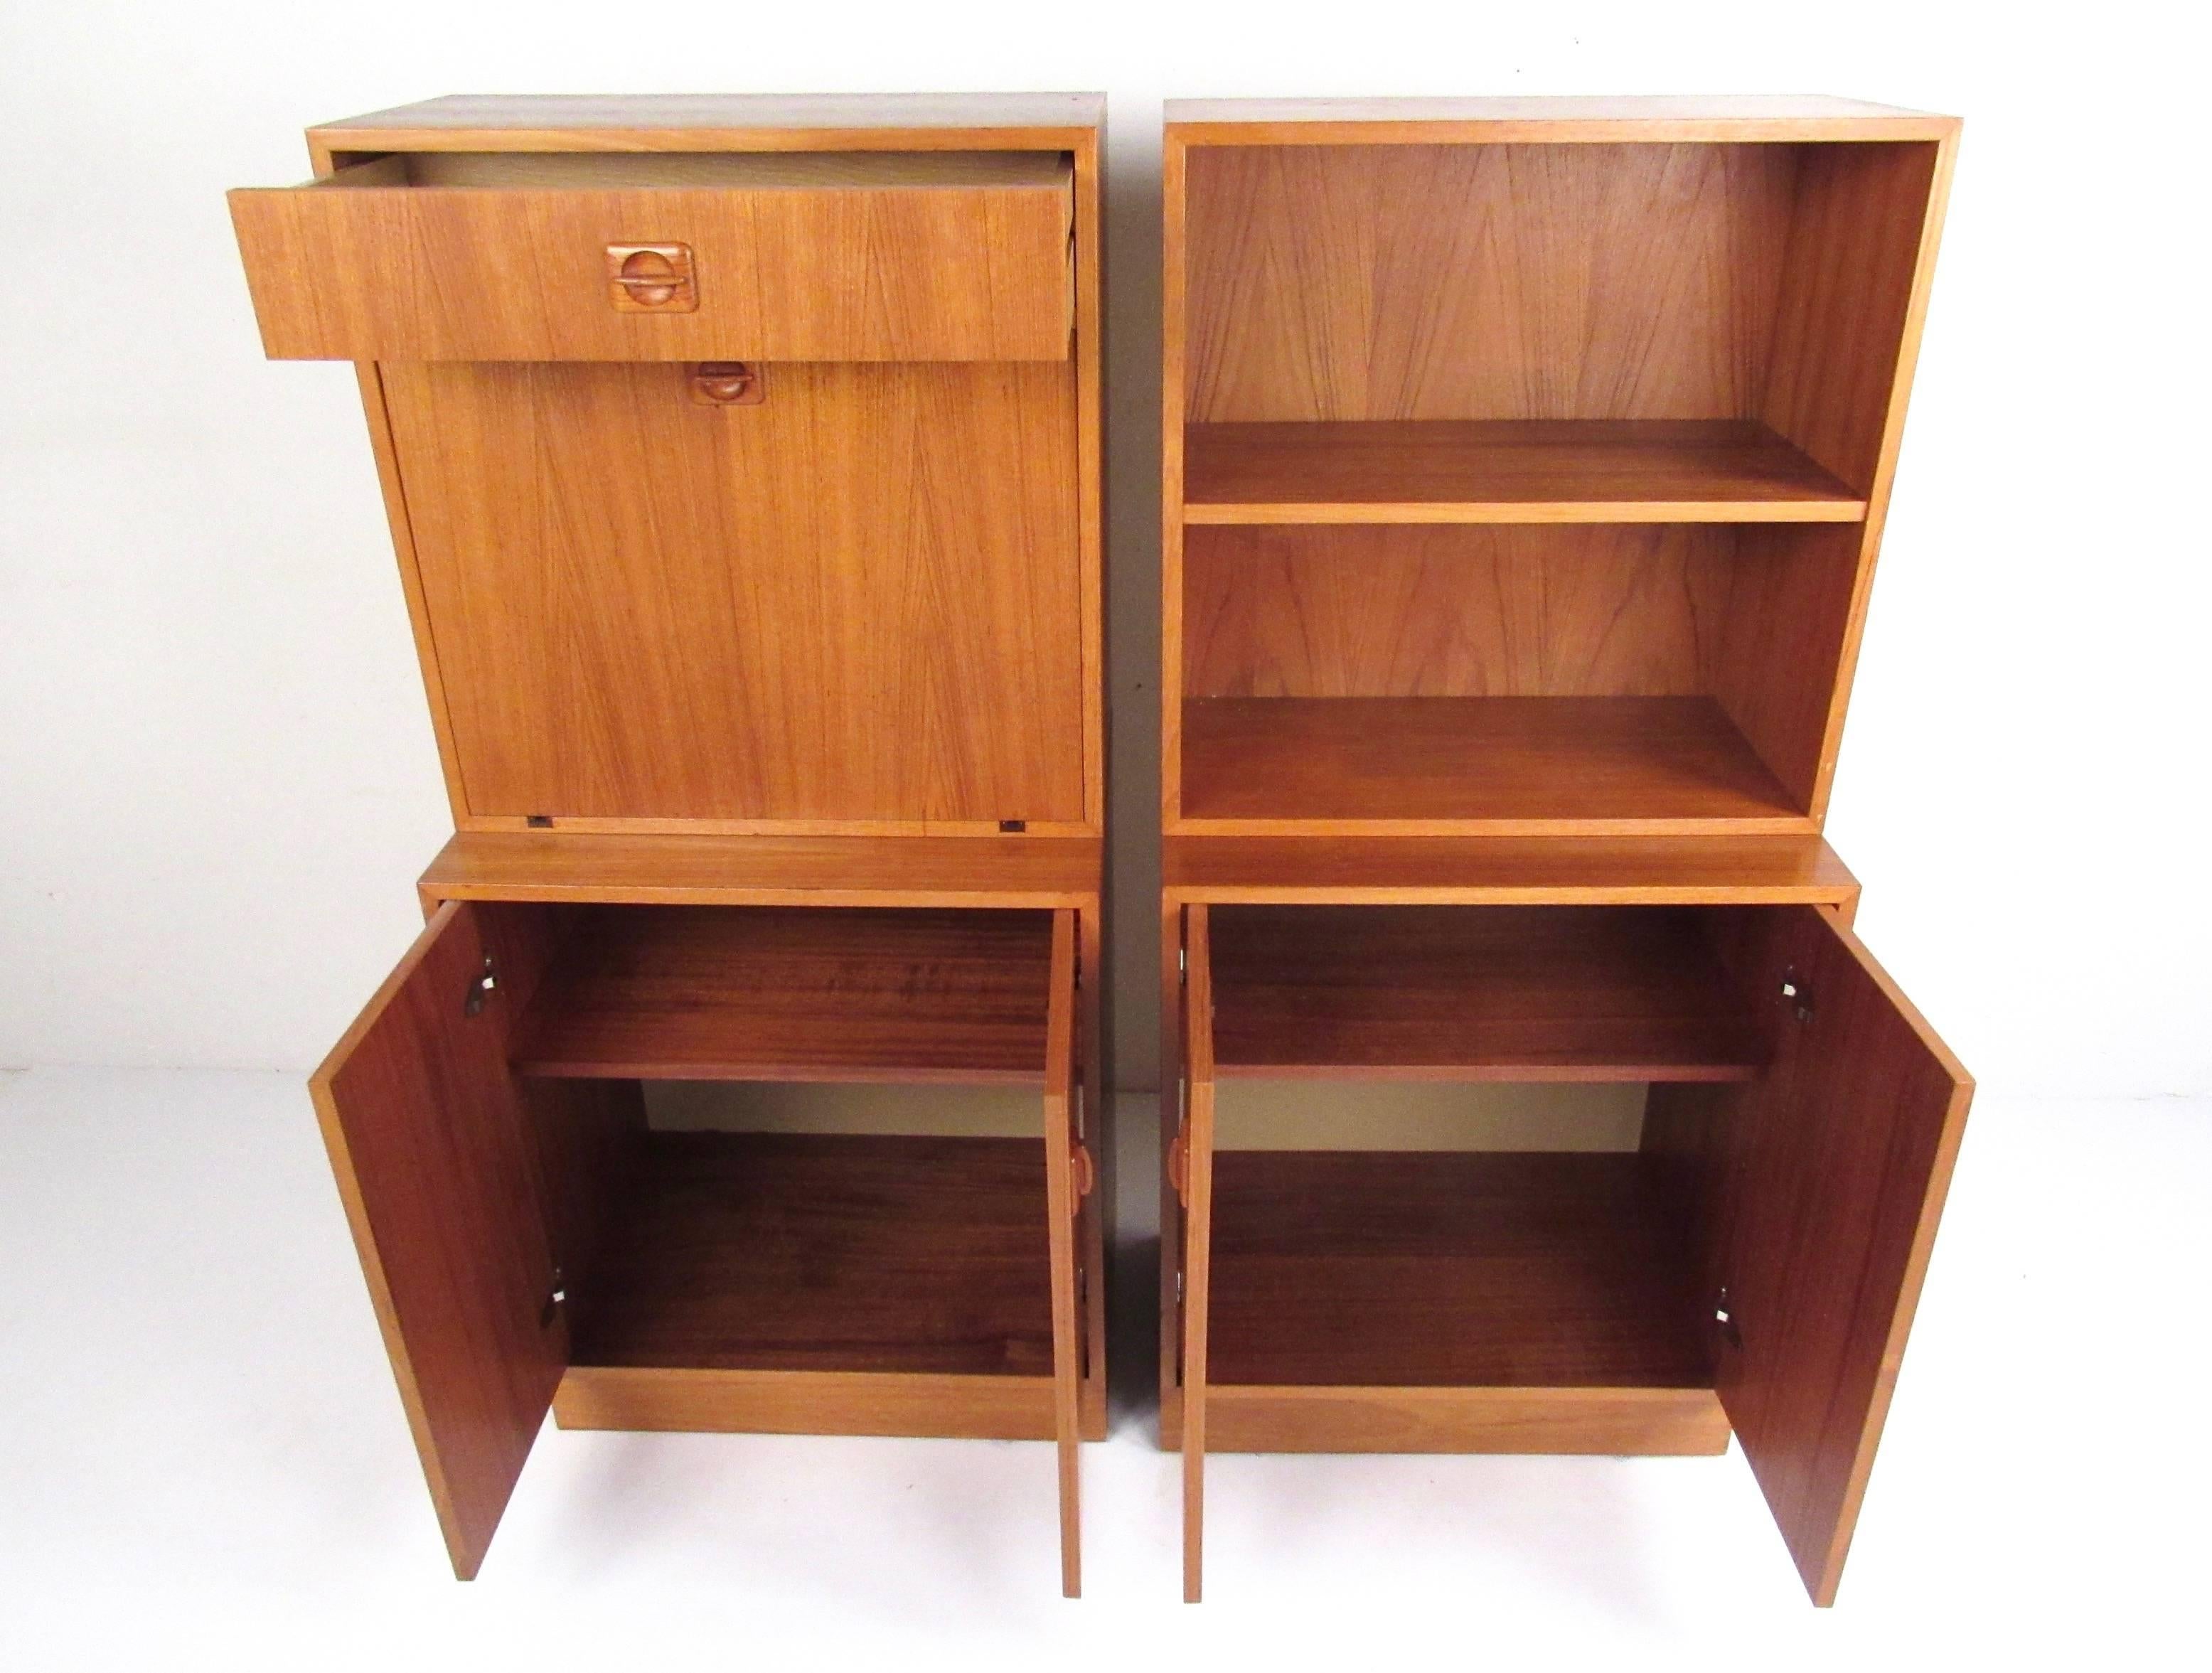 This stylish pair of teak cabinets feature a versatile array of storage, work, and display space. With Scandinavian modern style design, carved door pulls, and teak finish this sharp looking pair is perfect for office or home interiors. Adjustable